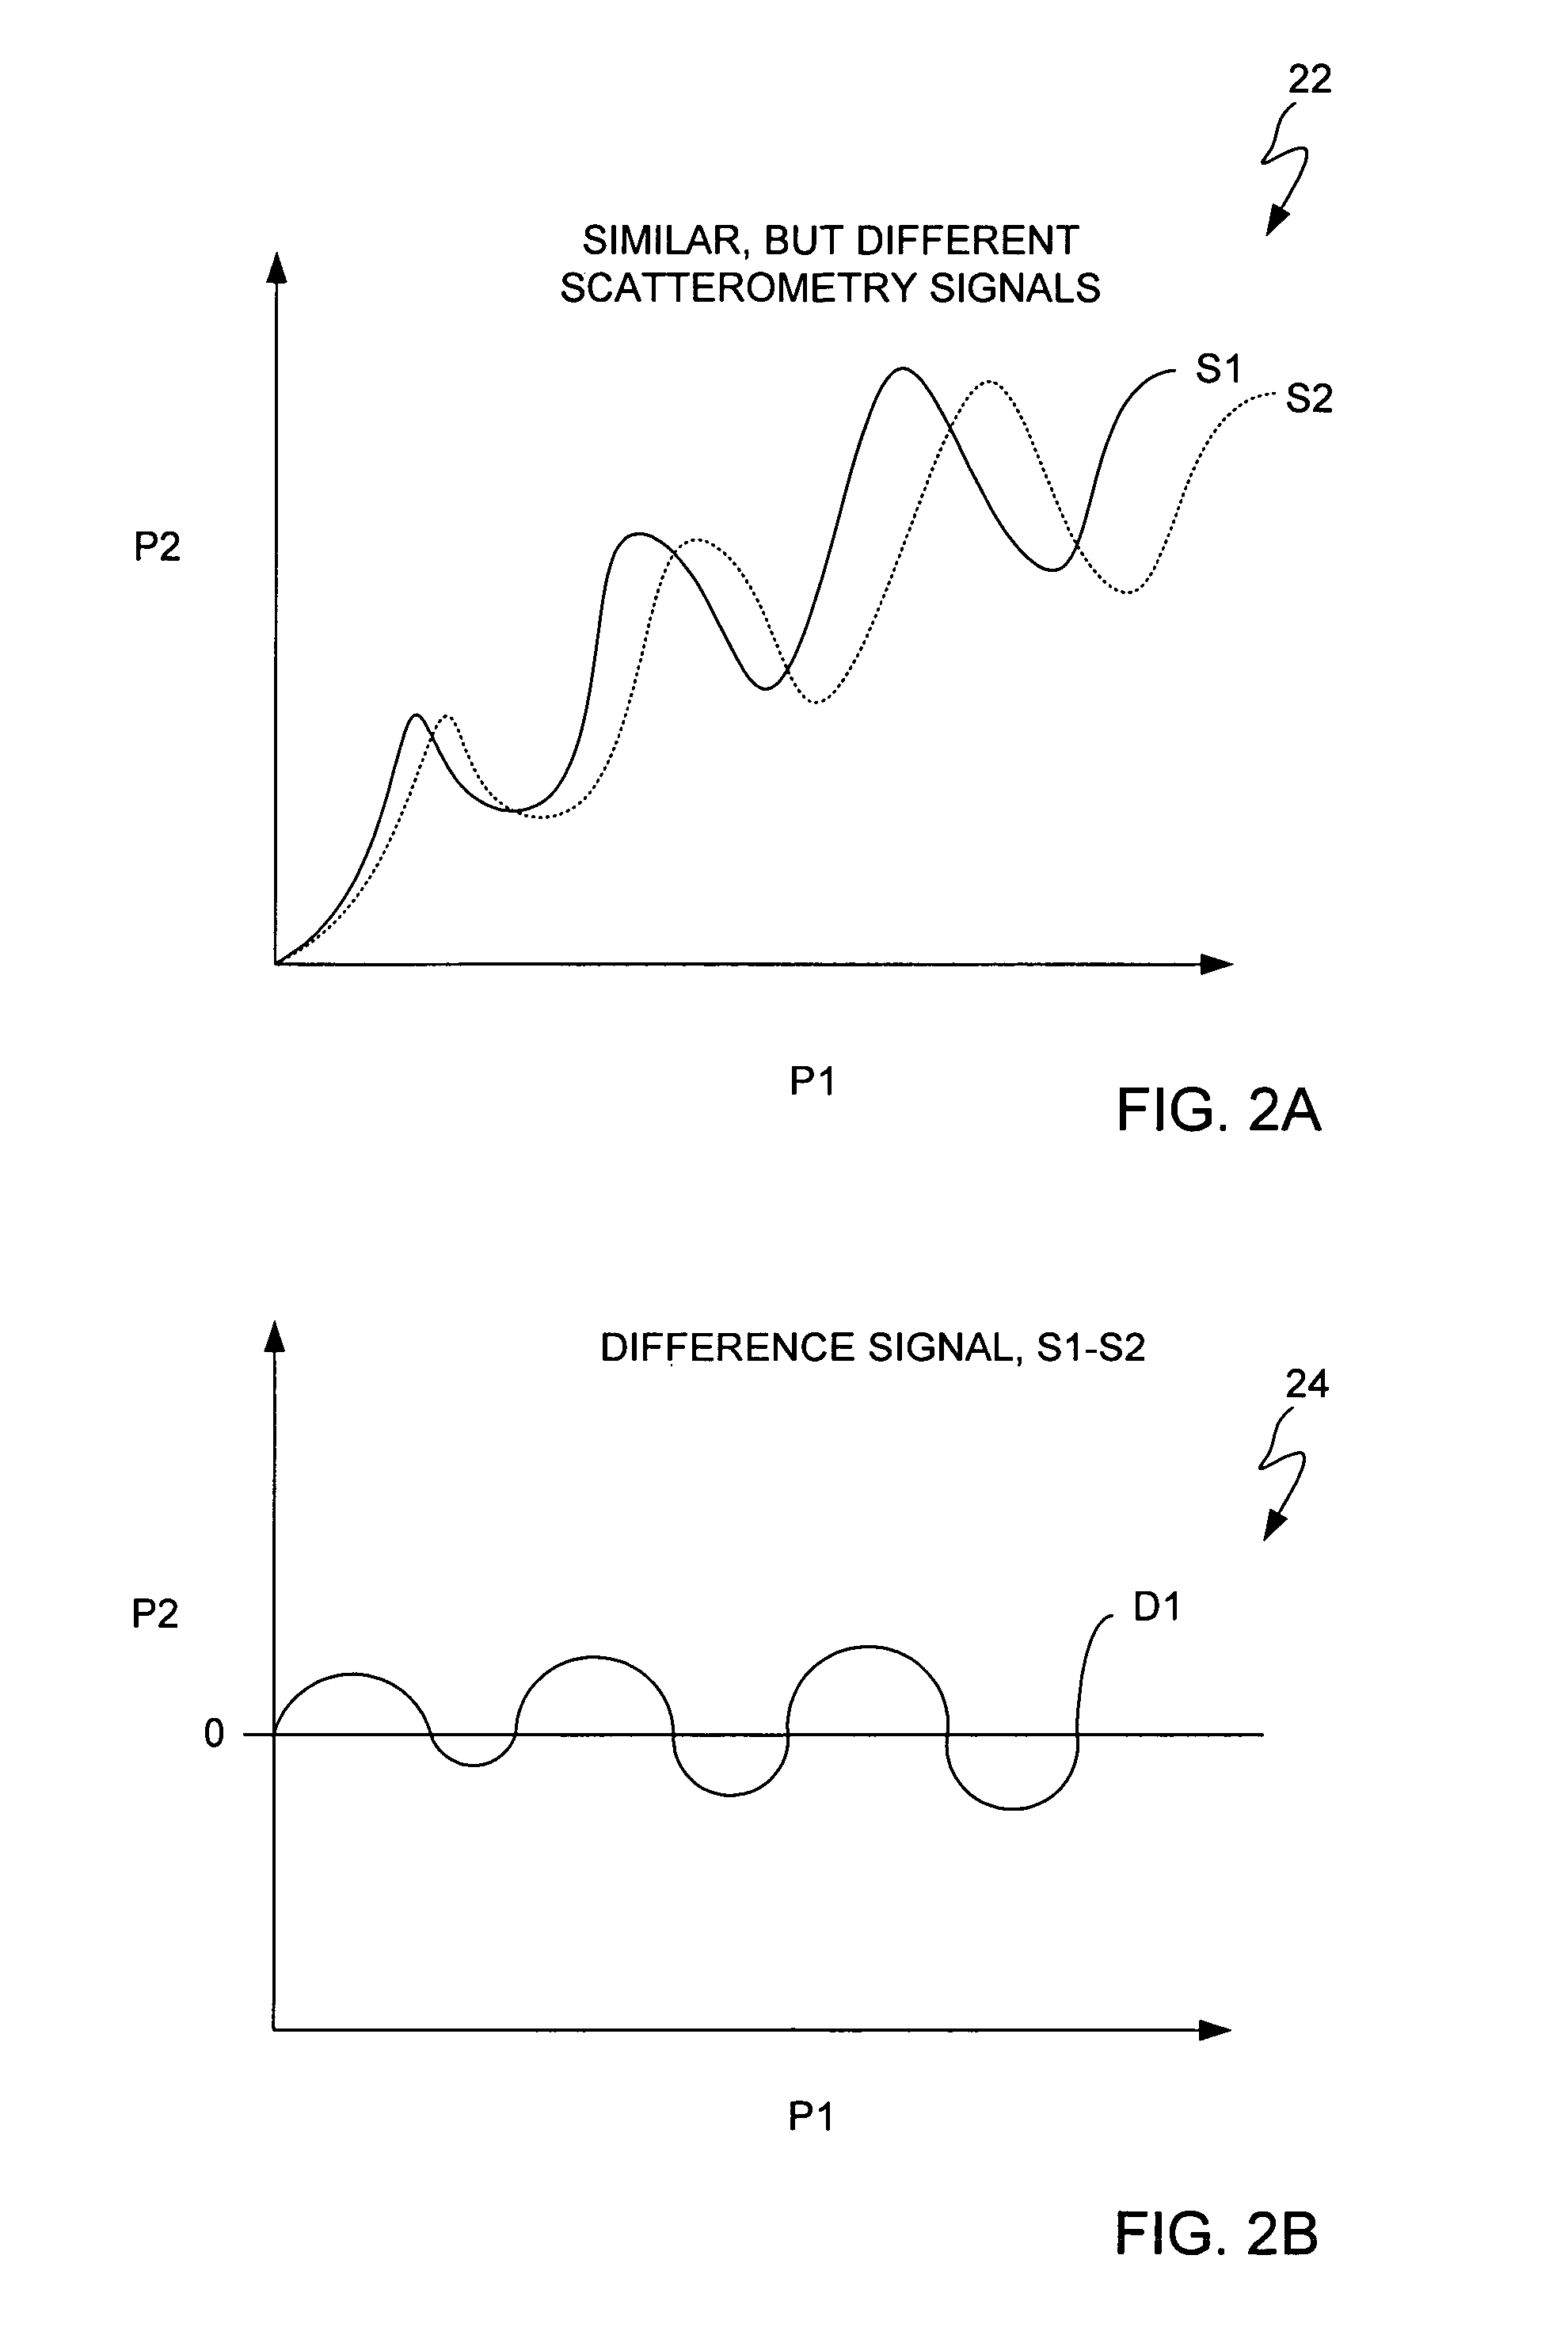 Method for process optimization and control by comparison between 2 or more measured scatterometry signals